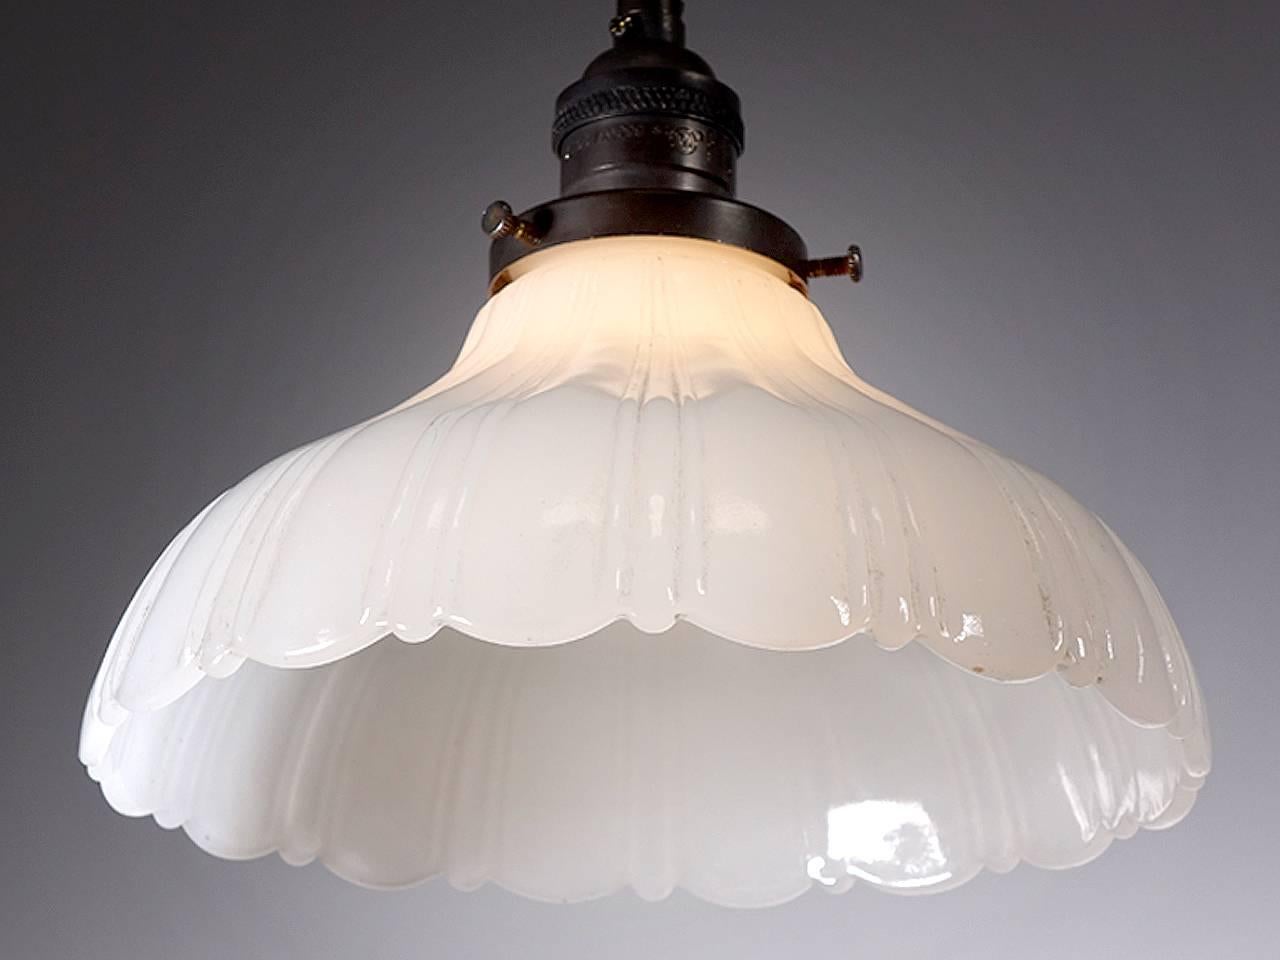 Softly curved bell shaped pendants are a Classic. They feel at home with any style decor. This example is an extra heavy thick-thin pattern in cast clam broth glass with a scalloped edge. The pattern has three thin ribs and one wide. The lamps are